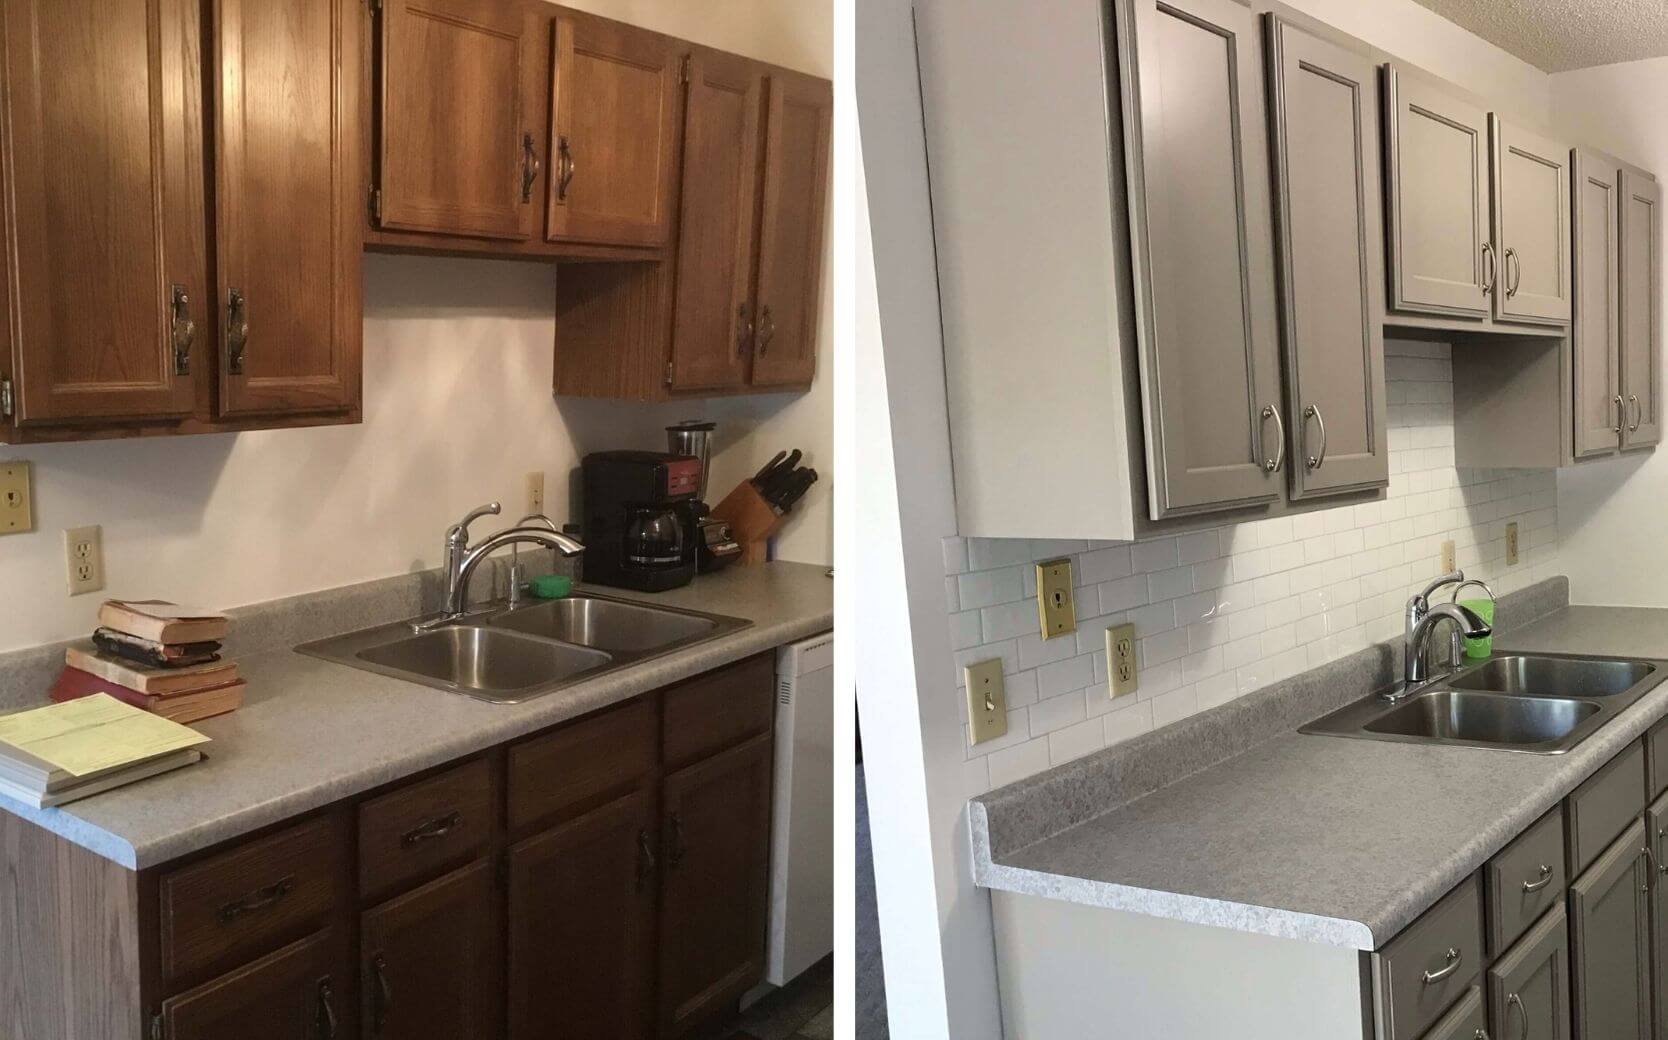 Before and after kitchen cabinet refinishing in Brandon, SD